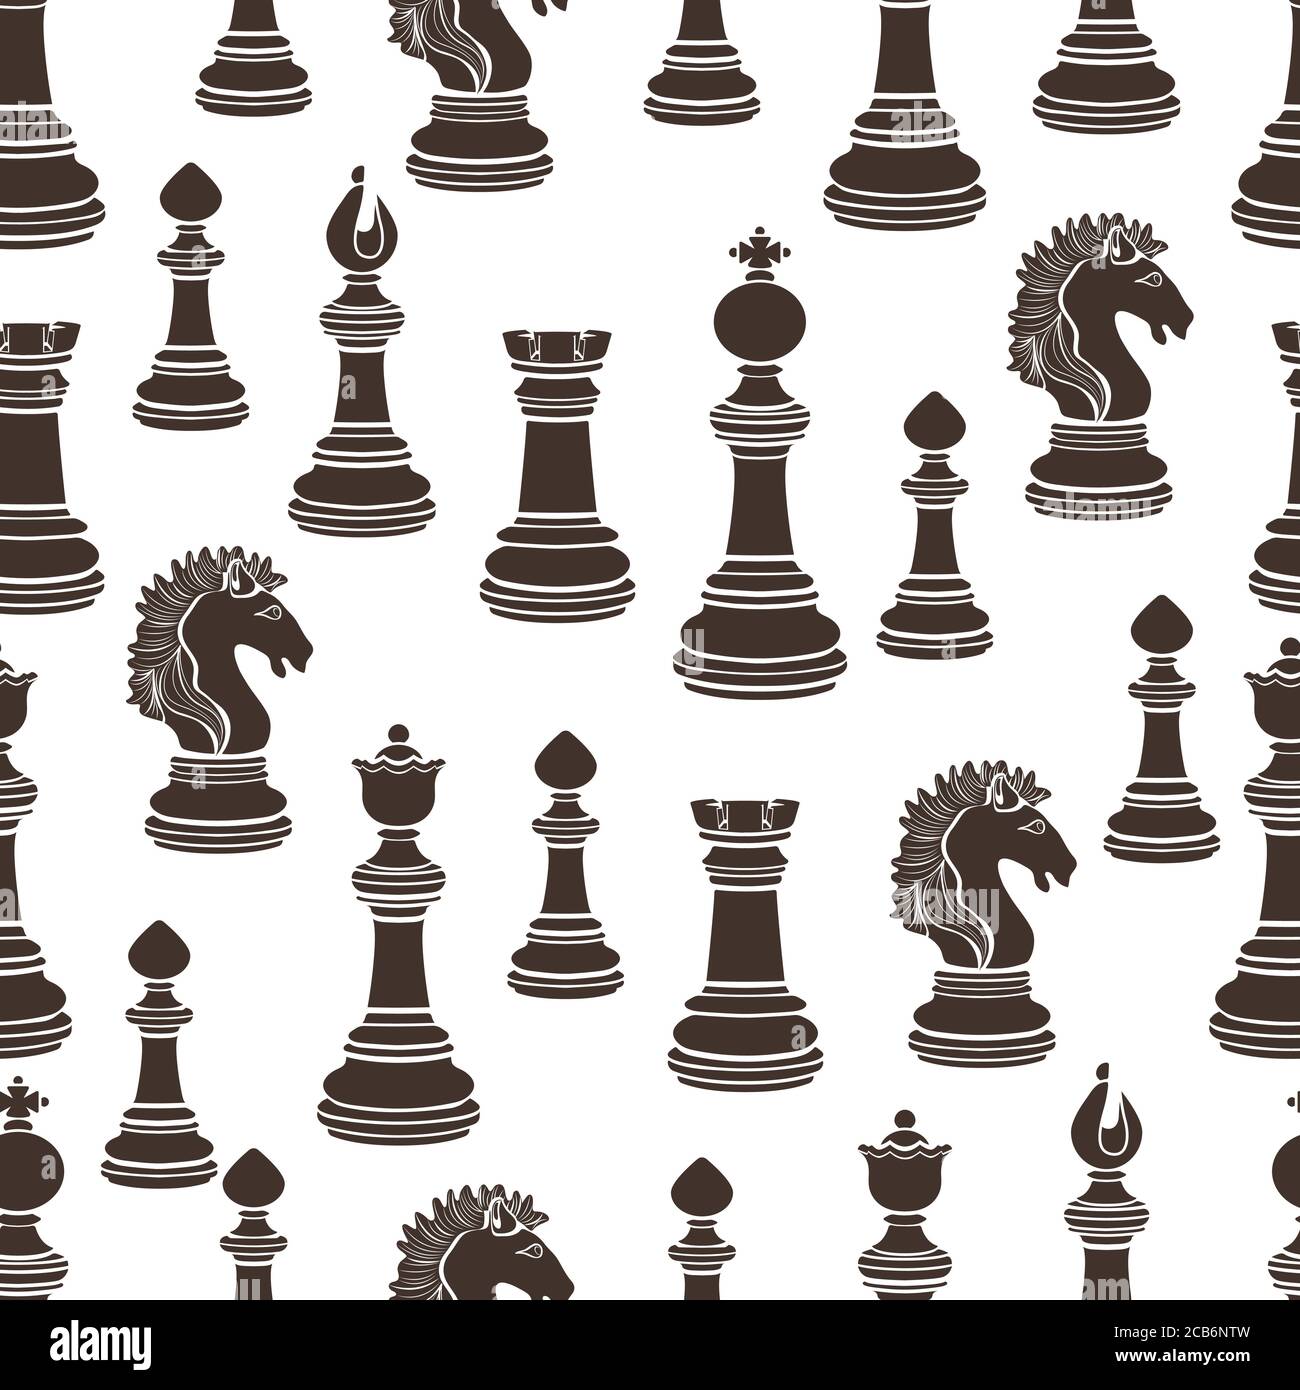 Chess Pieces Vector Illustration Chess Pieces King Knight Rook Pawns On A  Chessboard Isolated On A White Background Stock Illustration - Download  Image Now - iStock